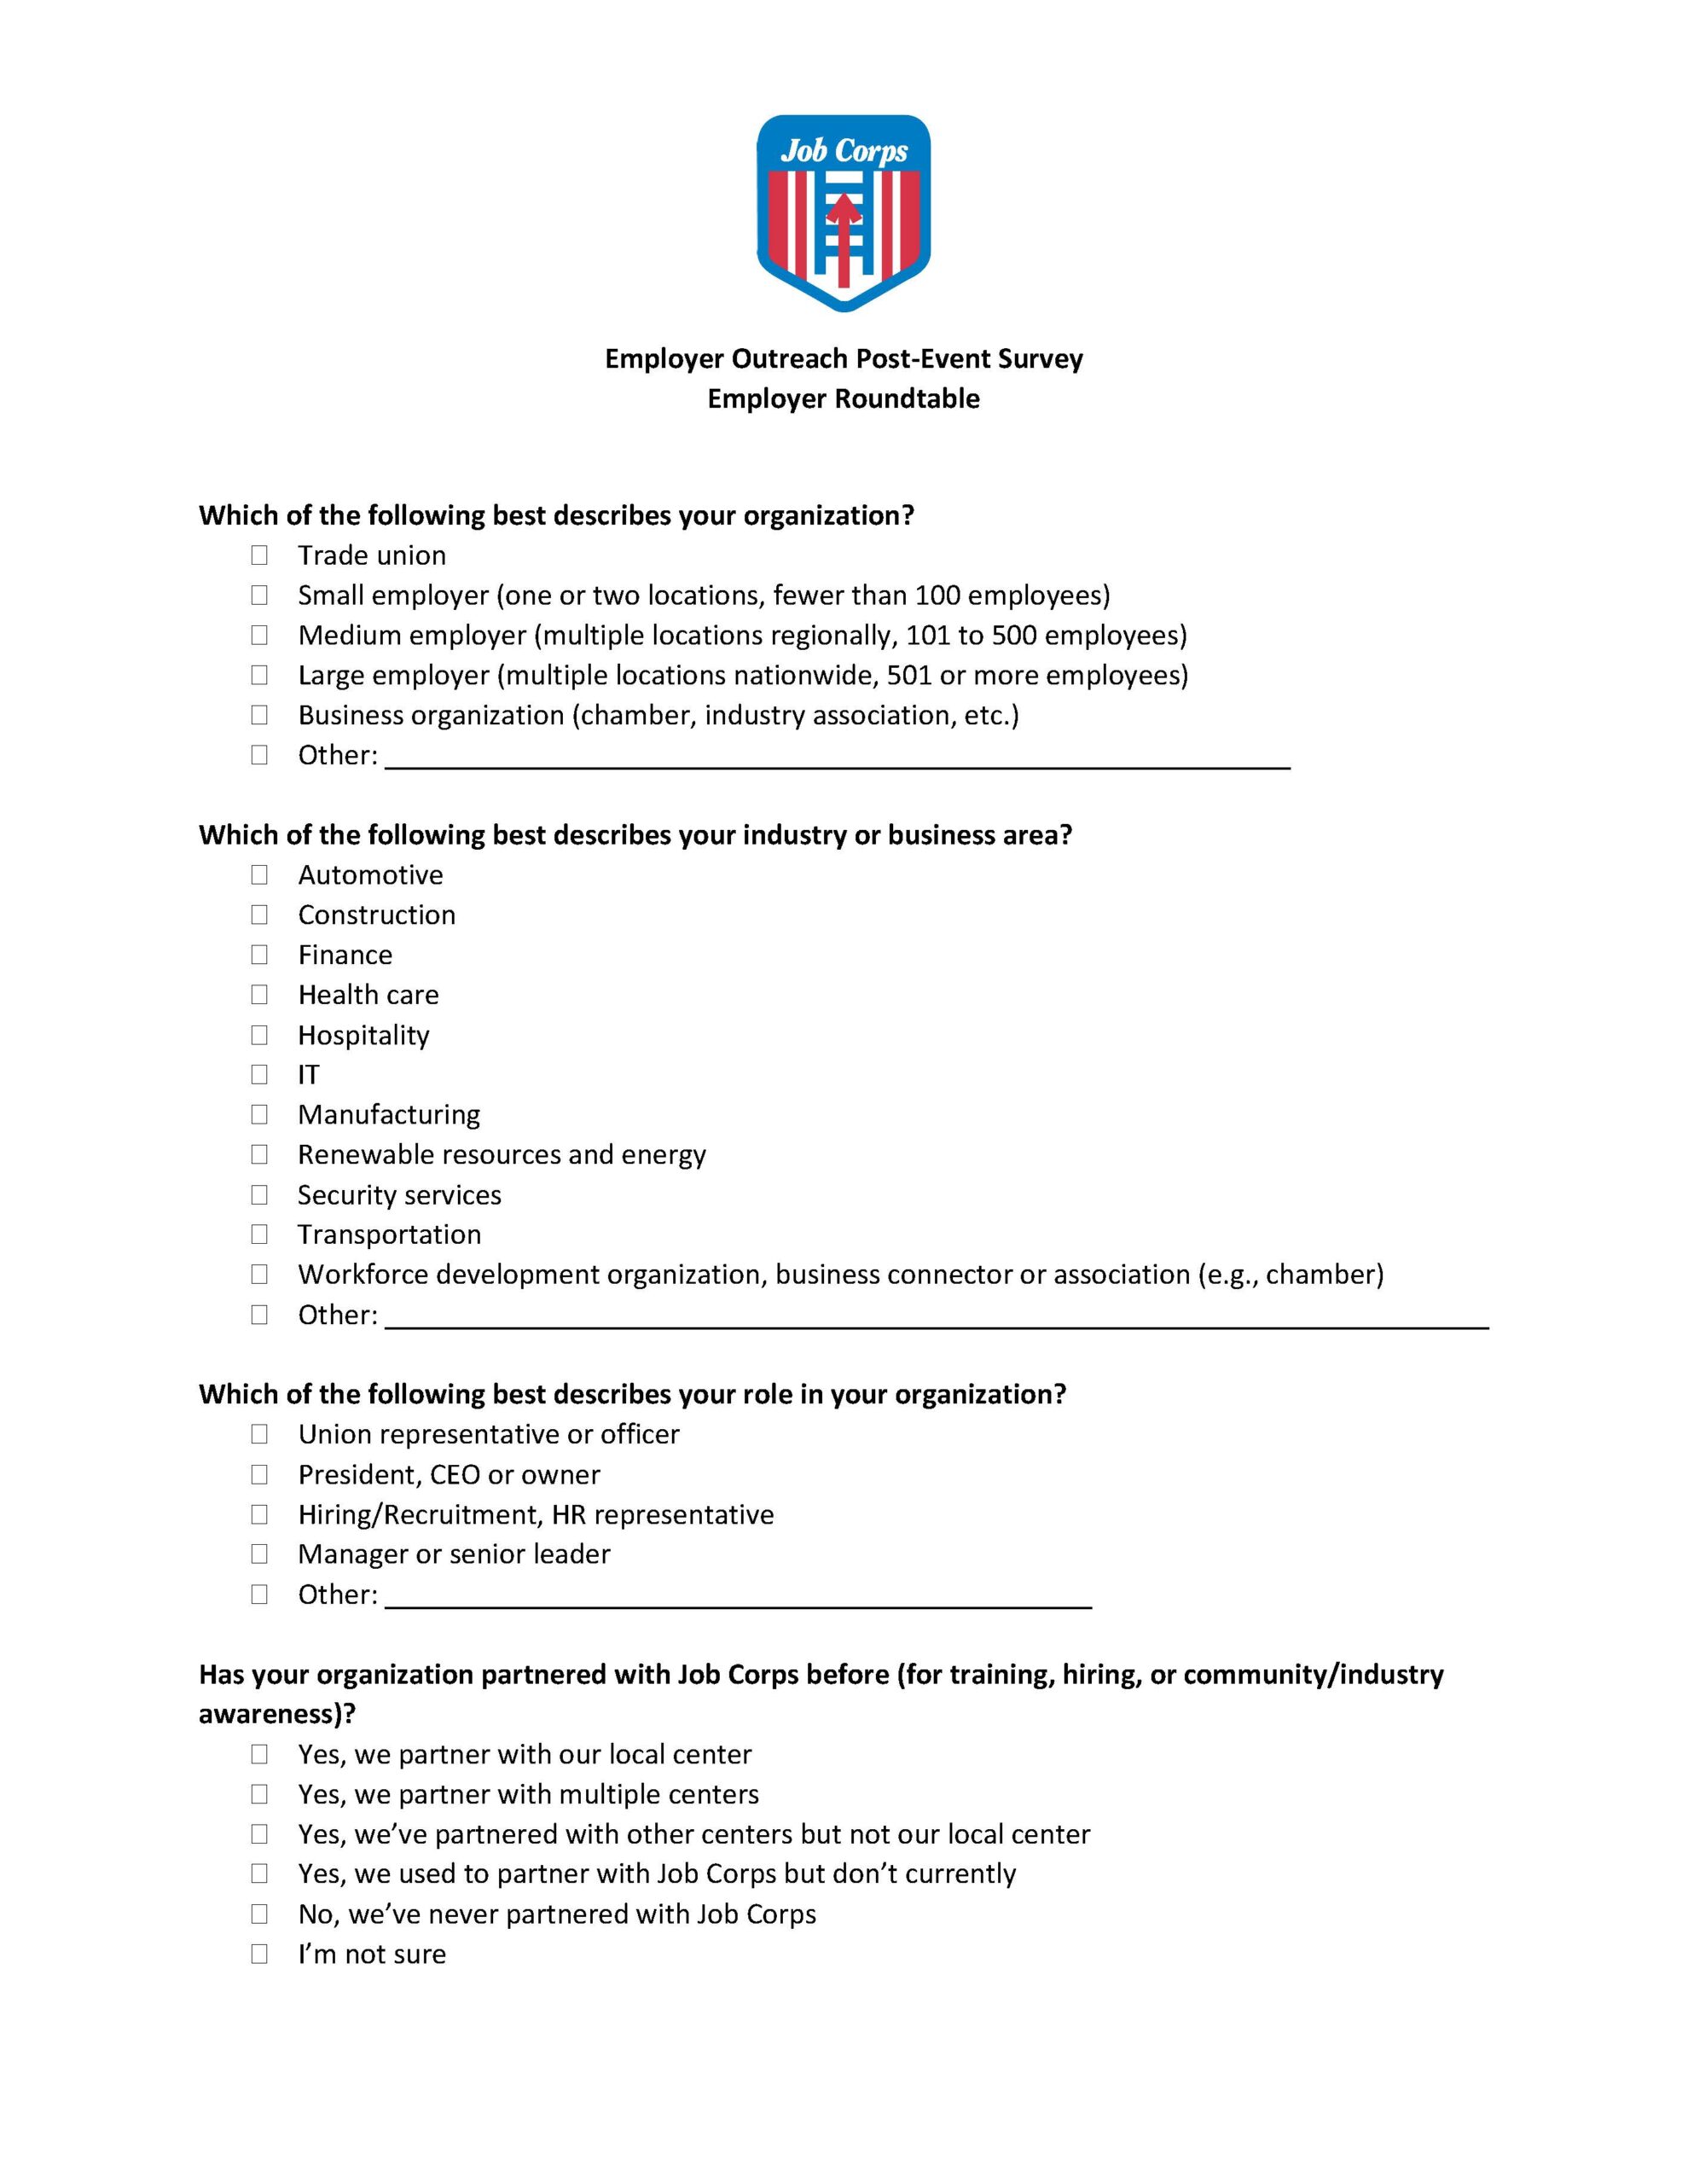 Post Event Survey Employer Roundtables Page 1